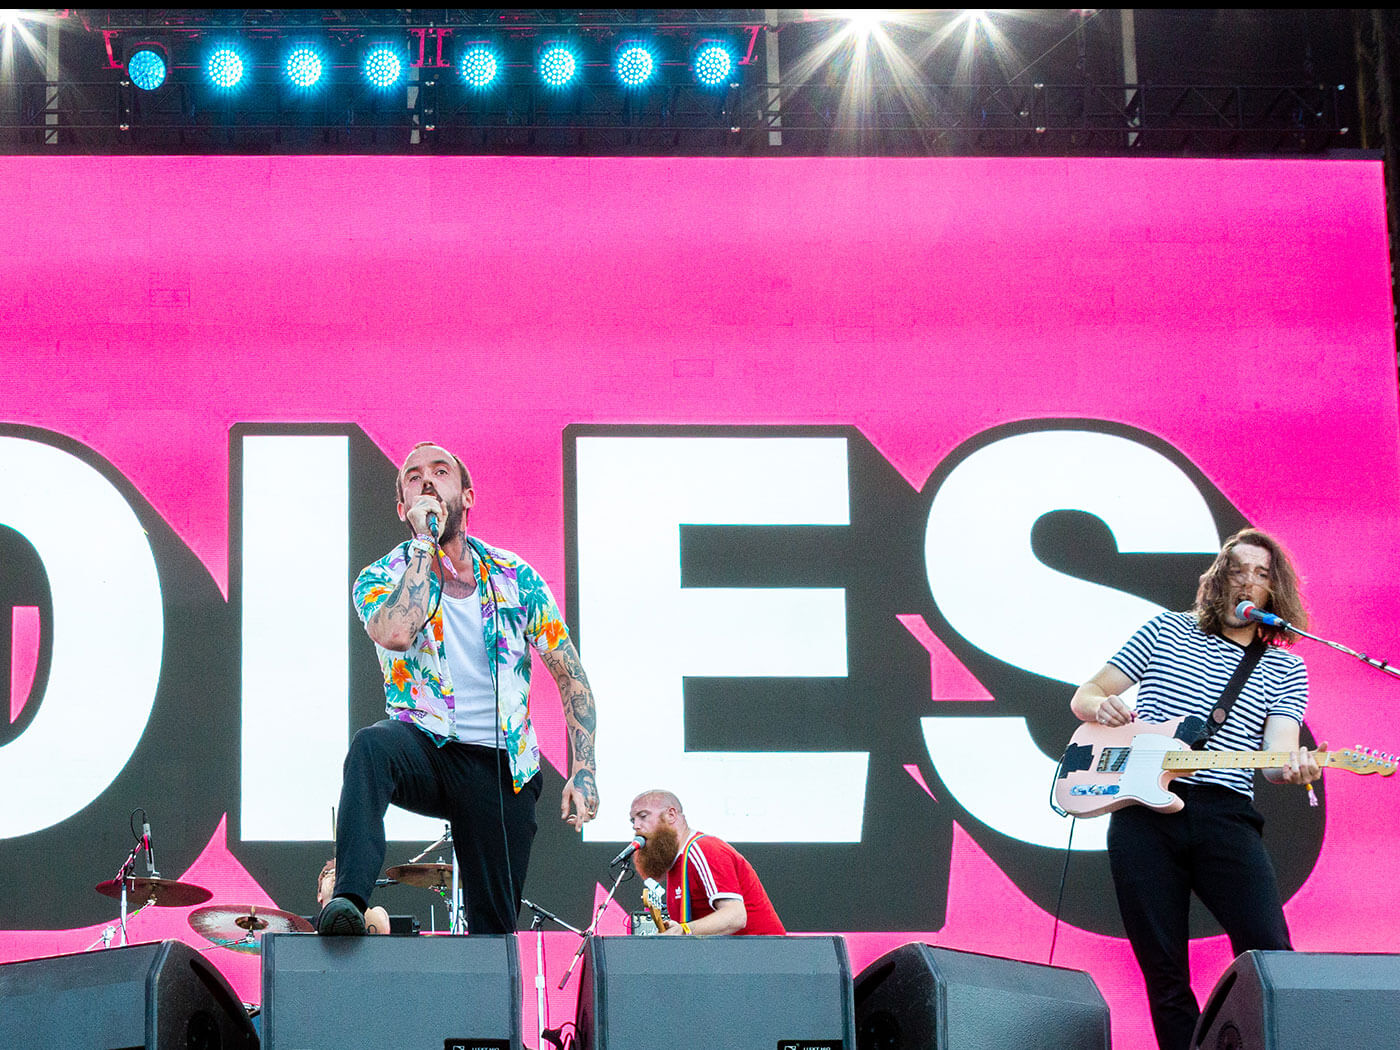 Idles performing live.